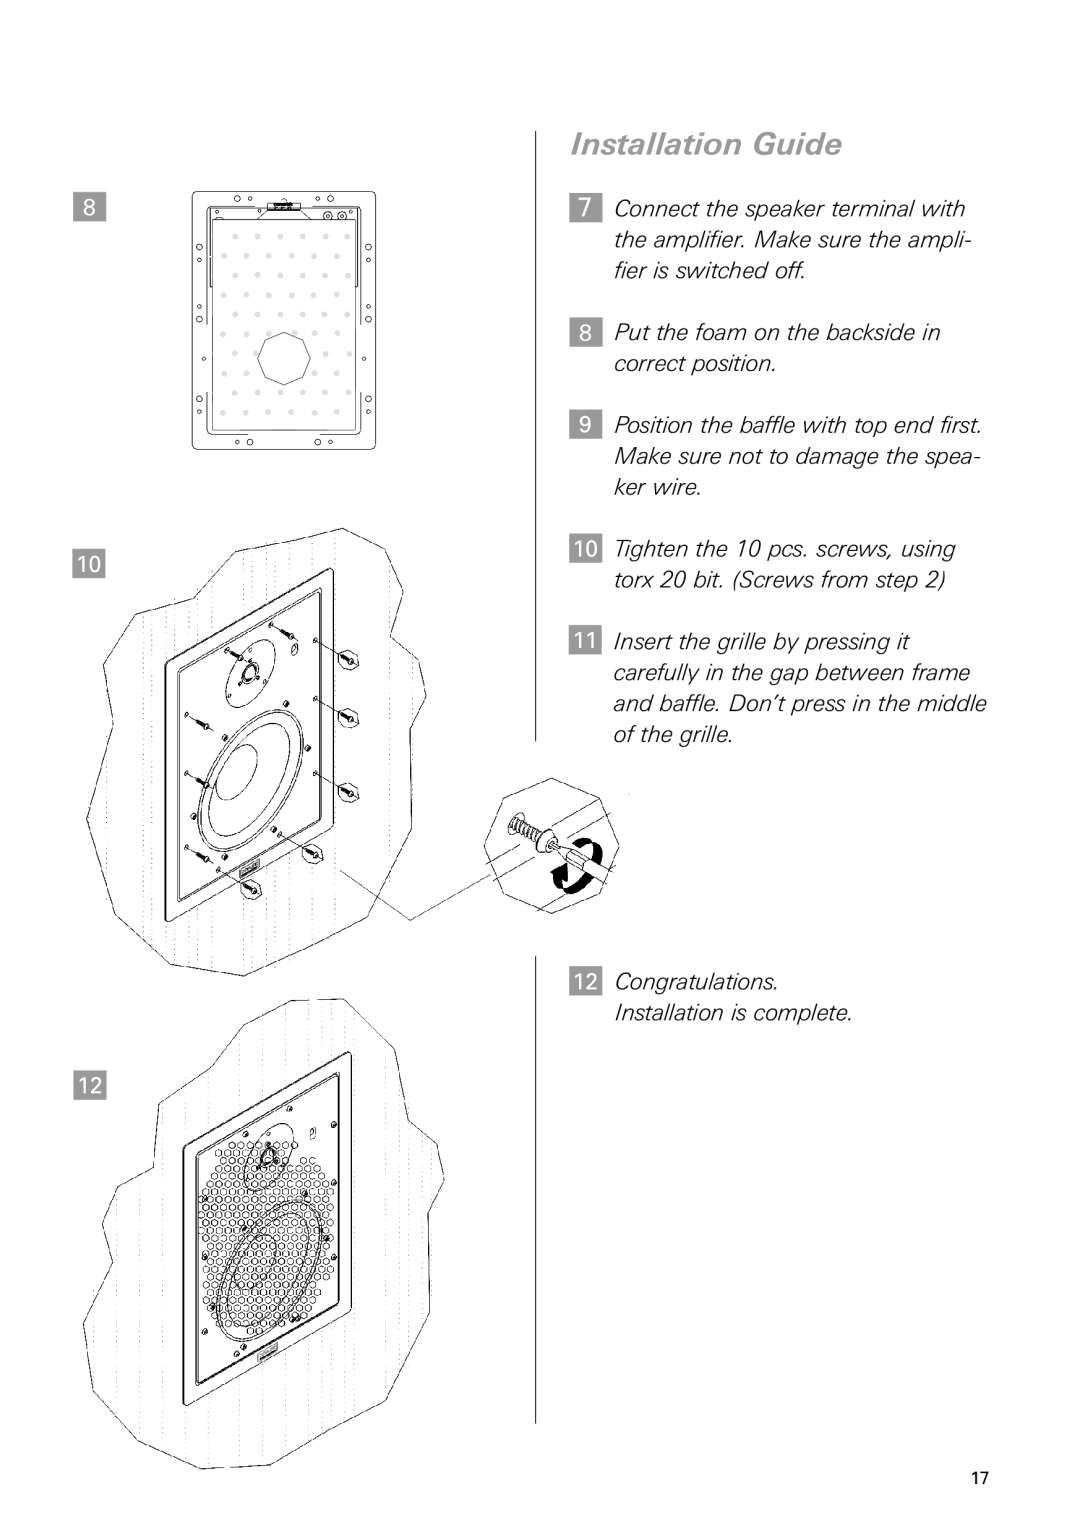 Dynaudio IP 24 instruction manual Installation Guide, 8Put the foam on the backside in correct position 